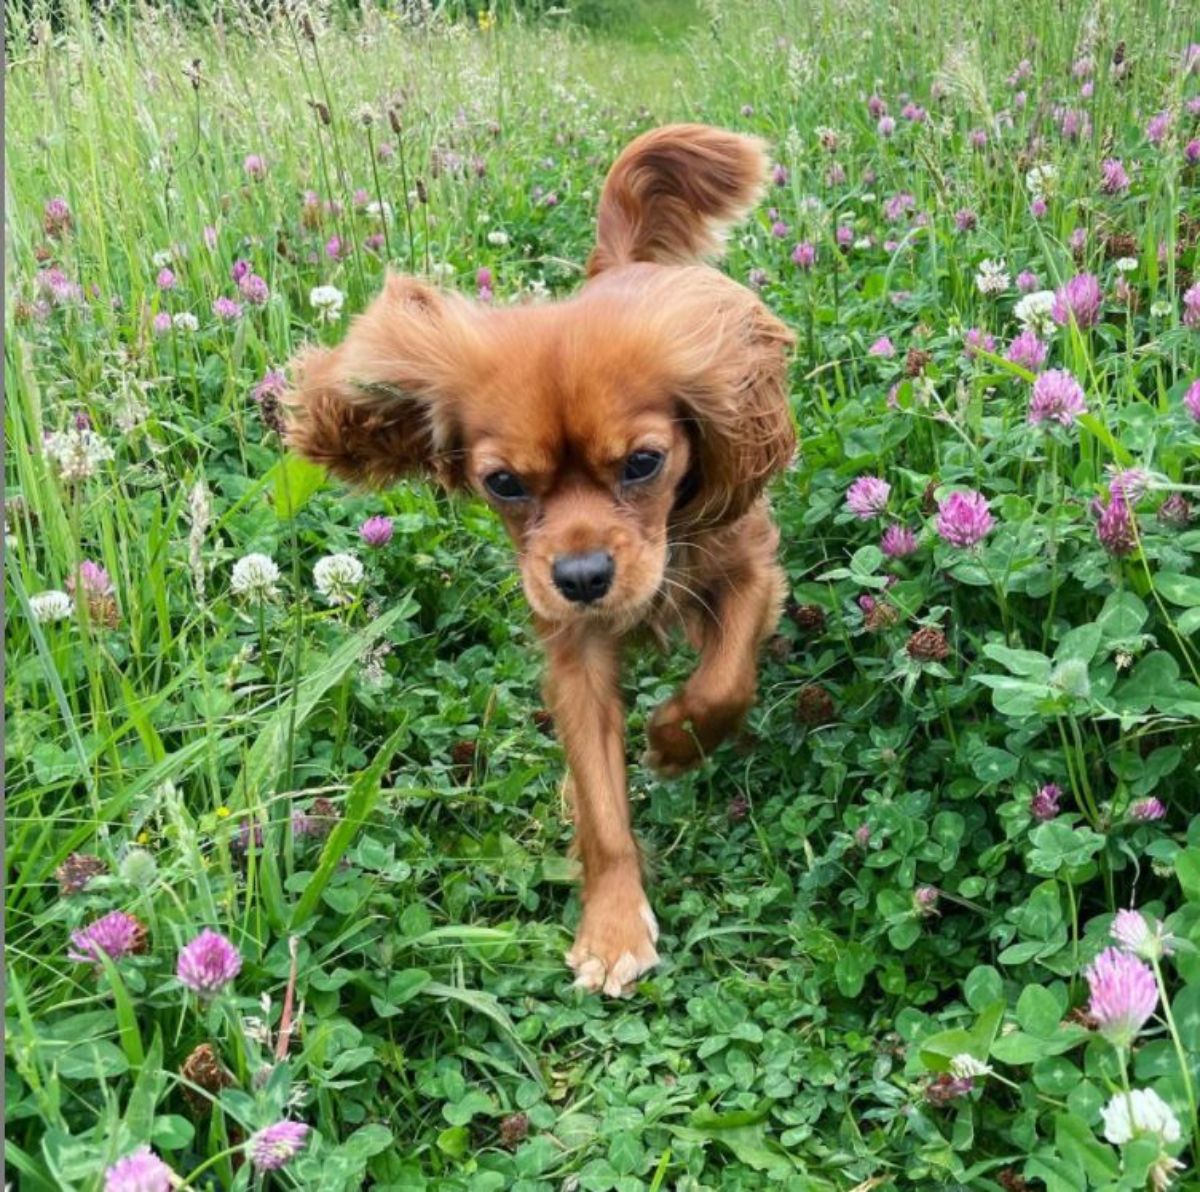 Cavalier King Charles Spaniel running in the middle of a field with flowers and grass